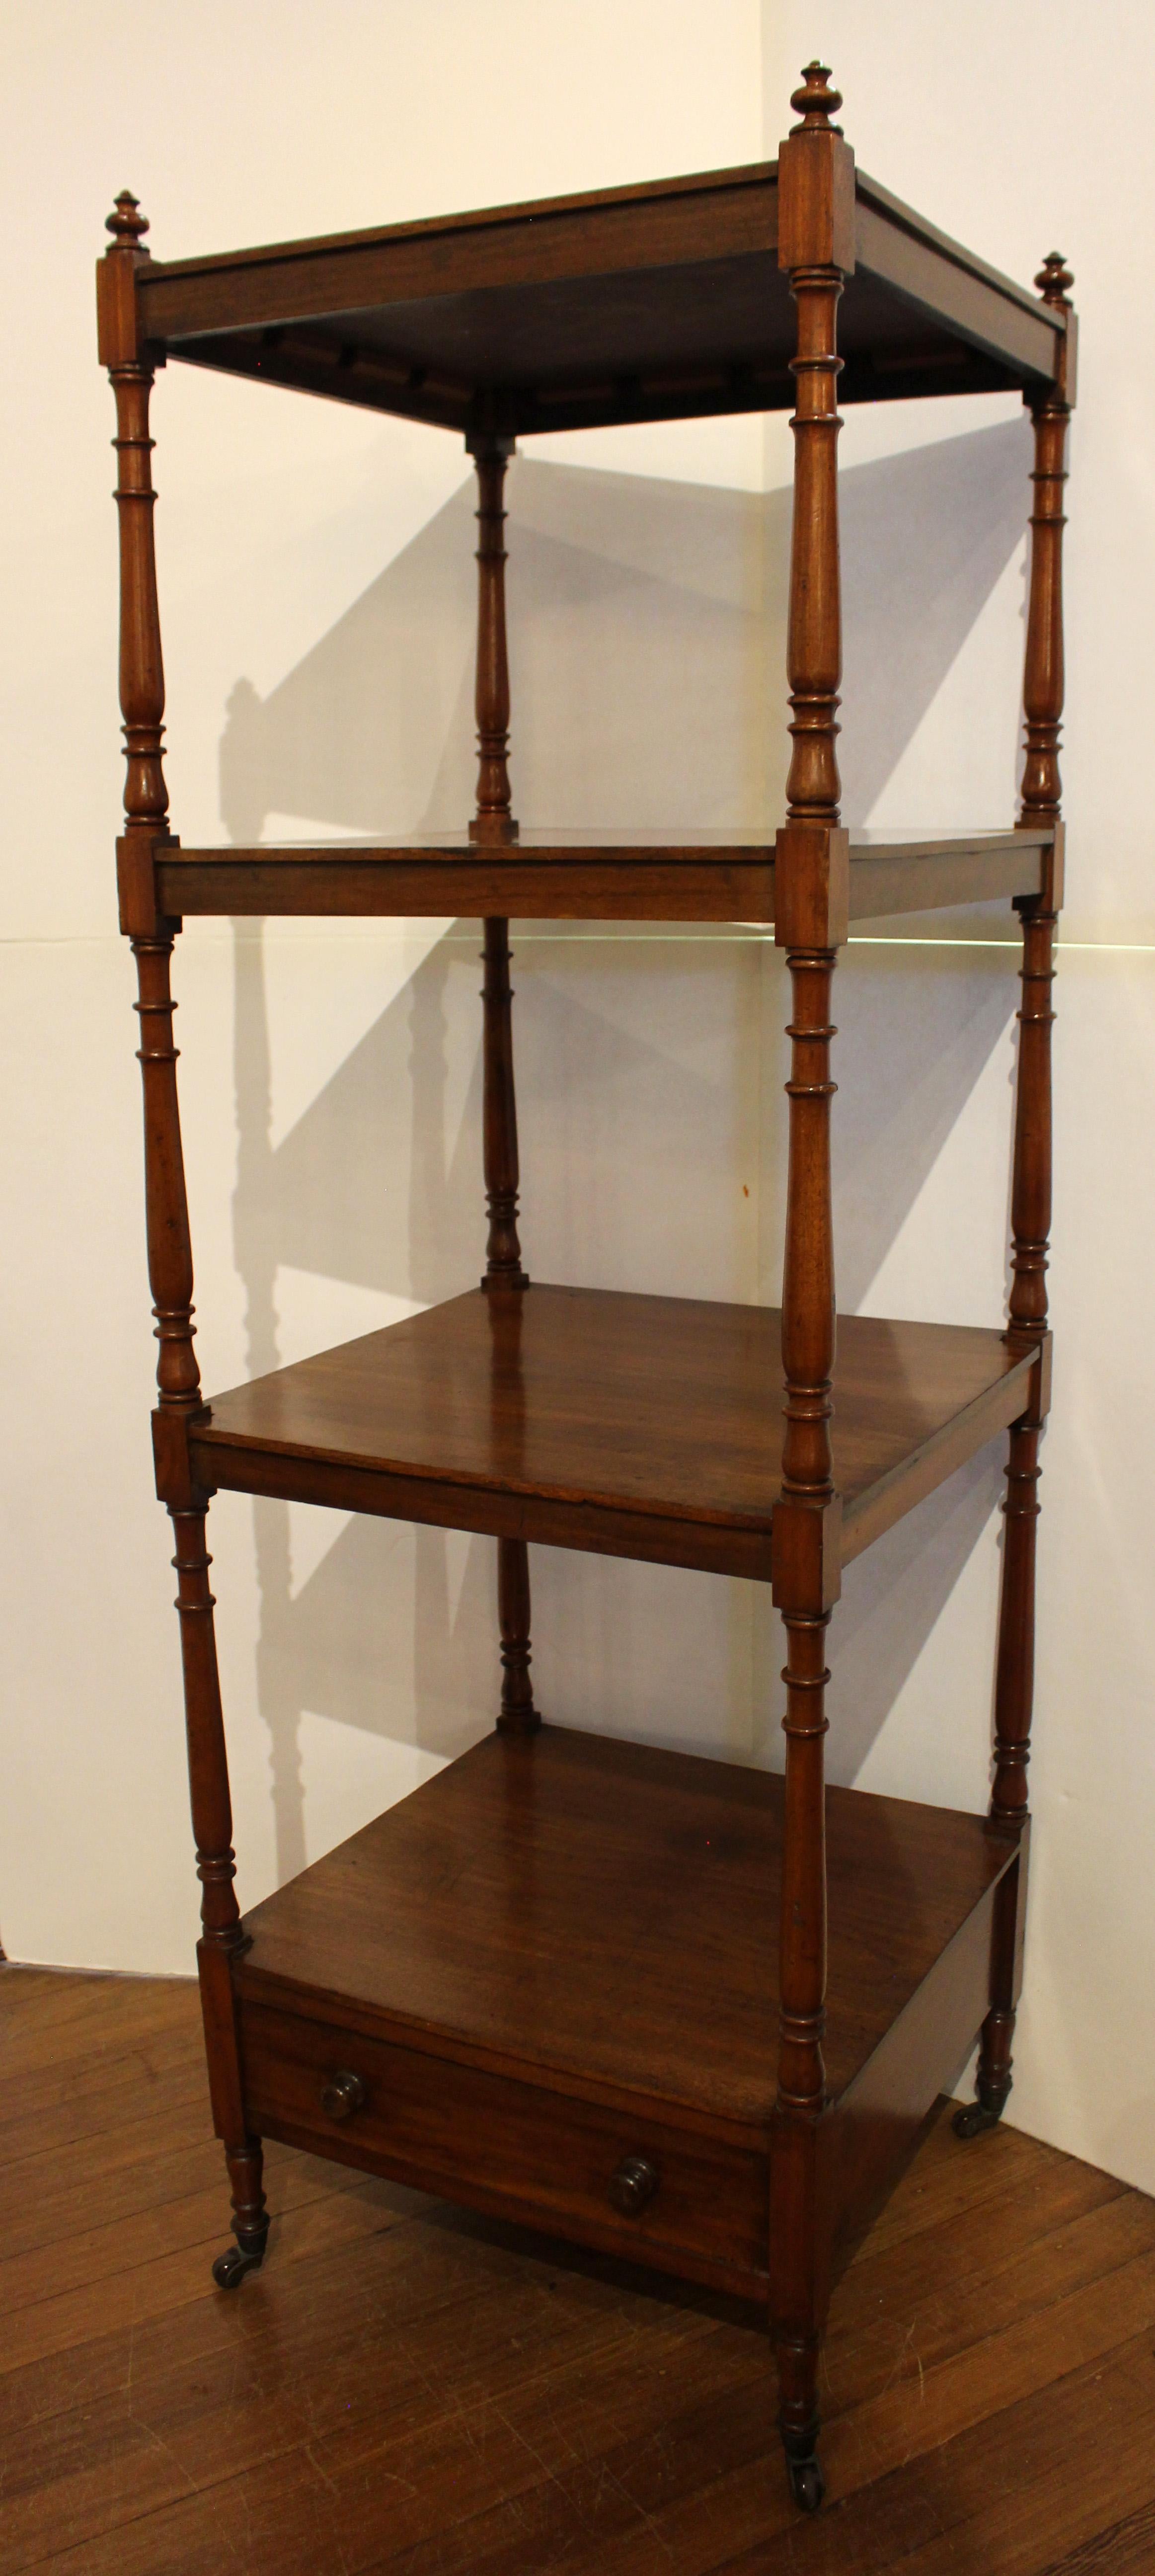 Regency Early 19th Century, Tall What-Not Stand or Etagere